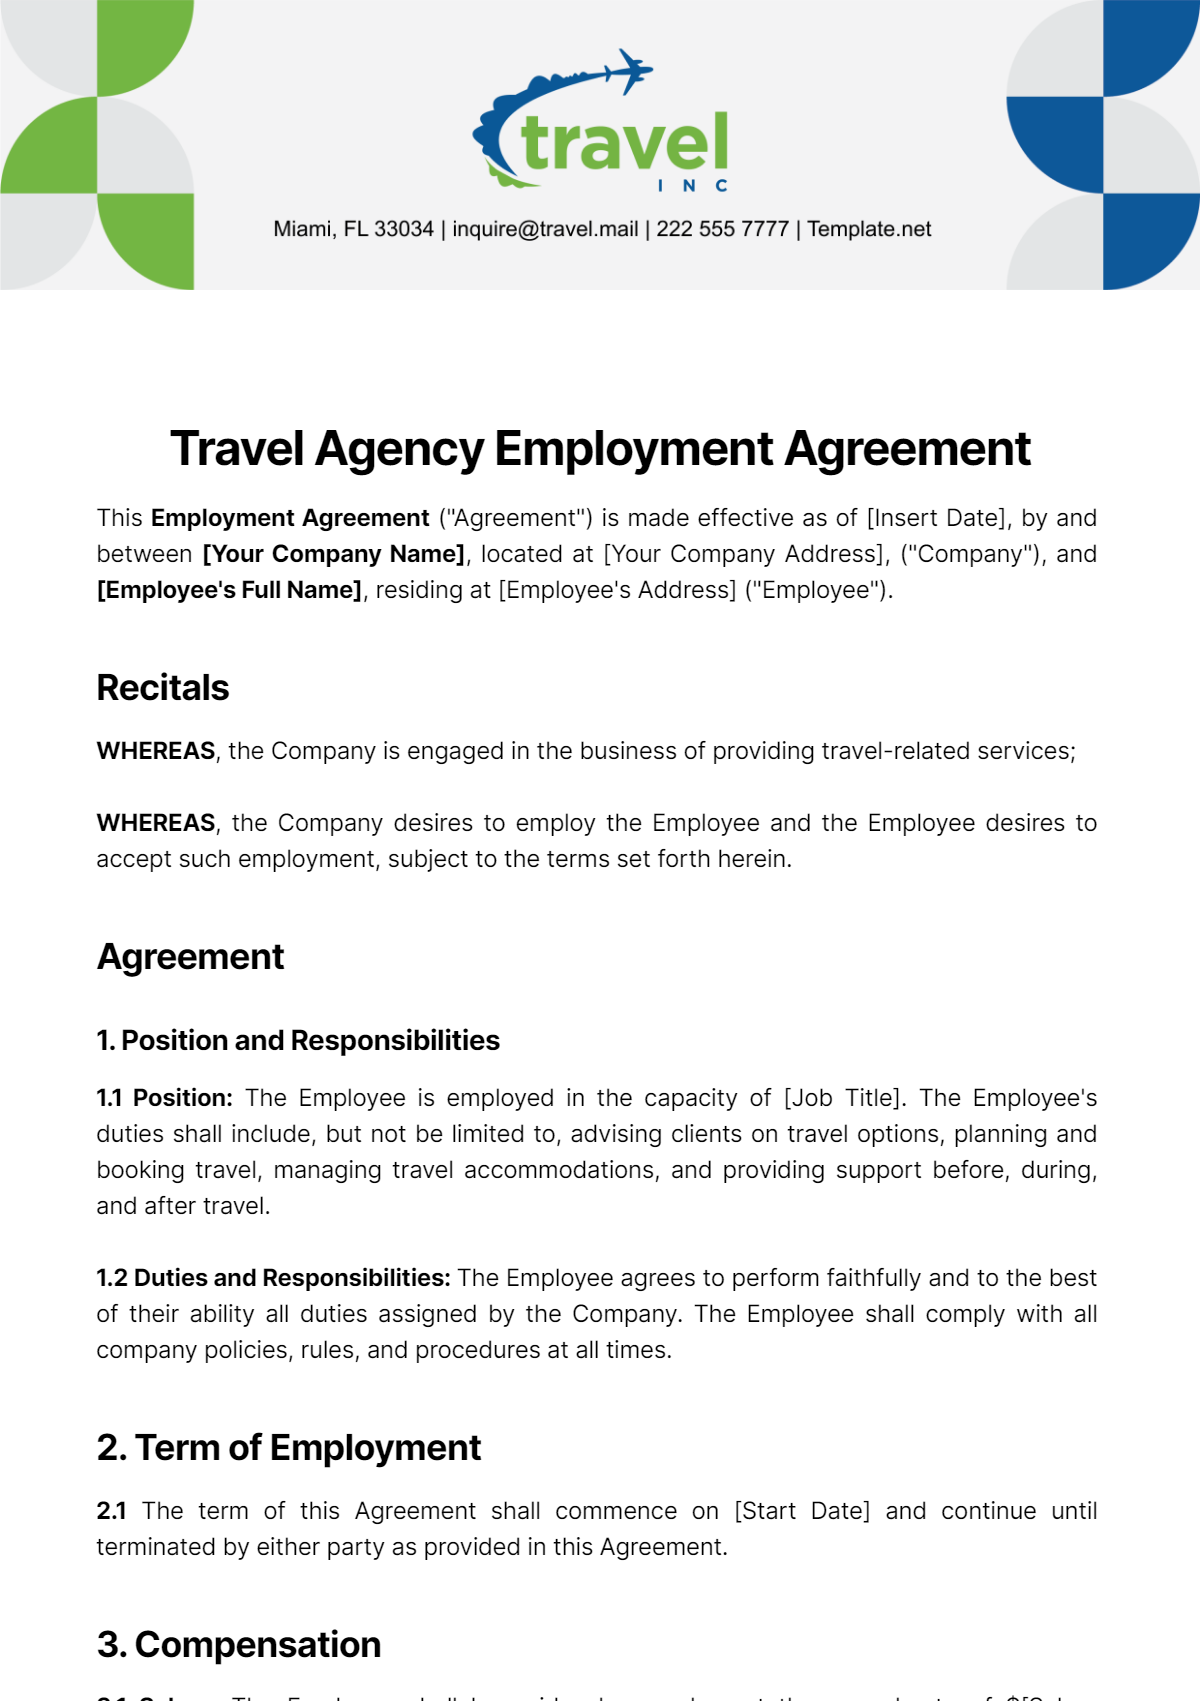 Free Travel Agency Employment Agreement Template